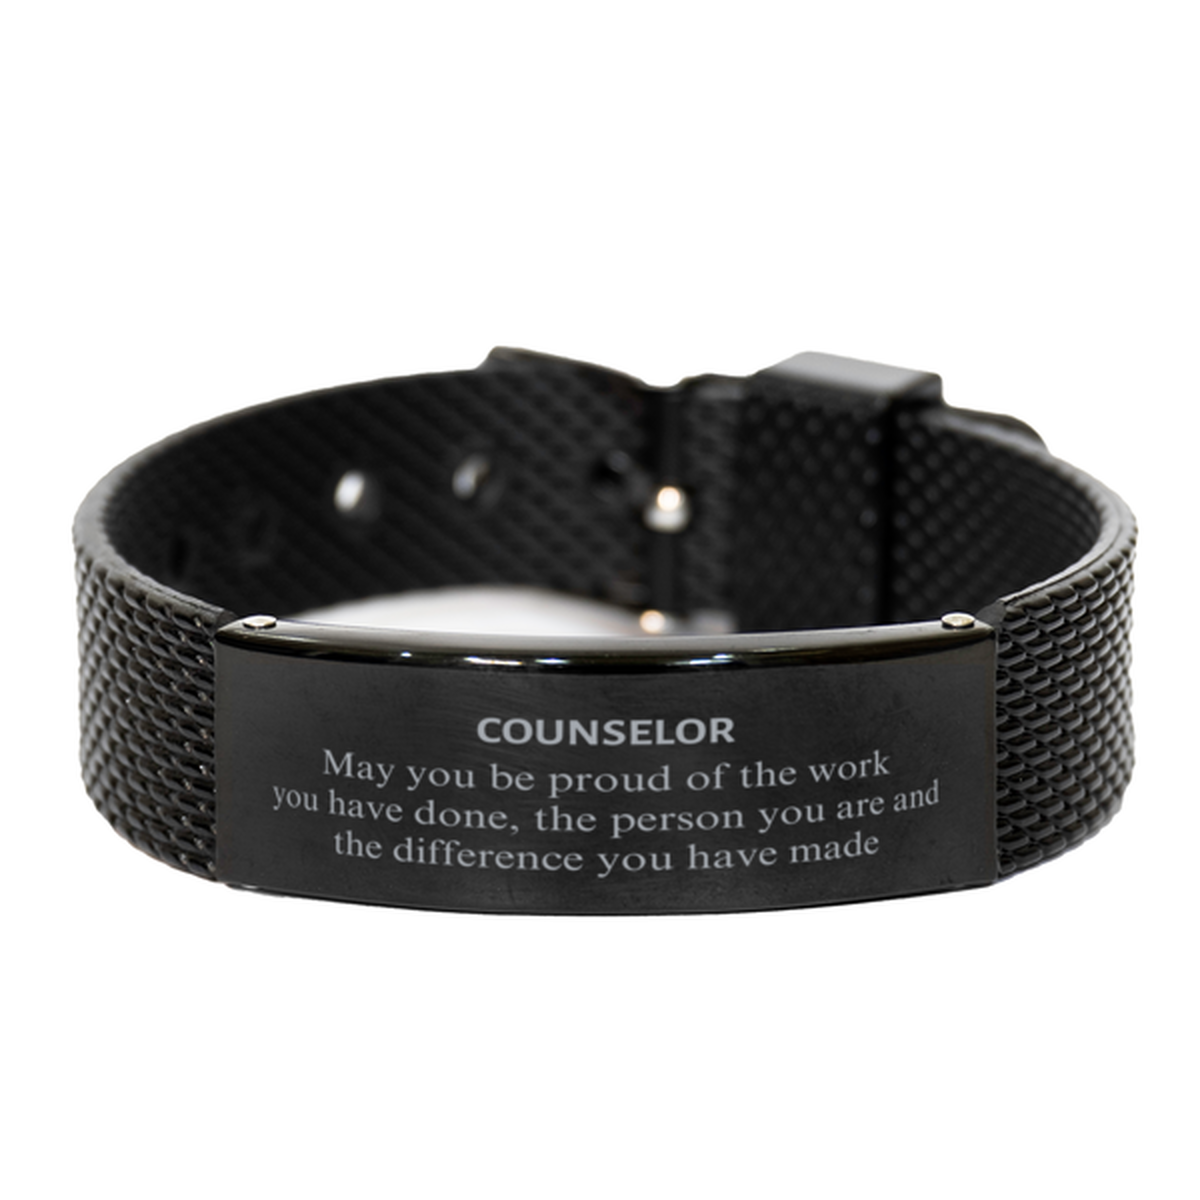 Counselor May you be proud of the work you have done, Retirement Counselor Black Shark Mesh Bracelet for Colleague Appreciation Gifts Amazing for Counselor